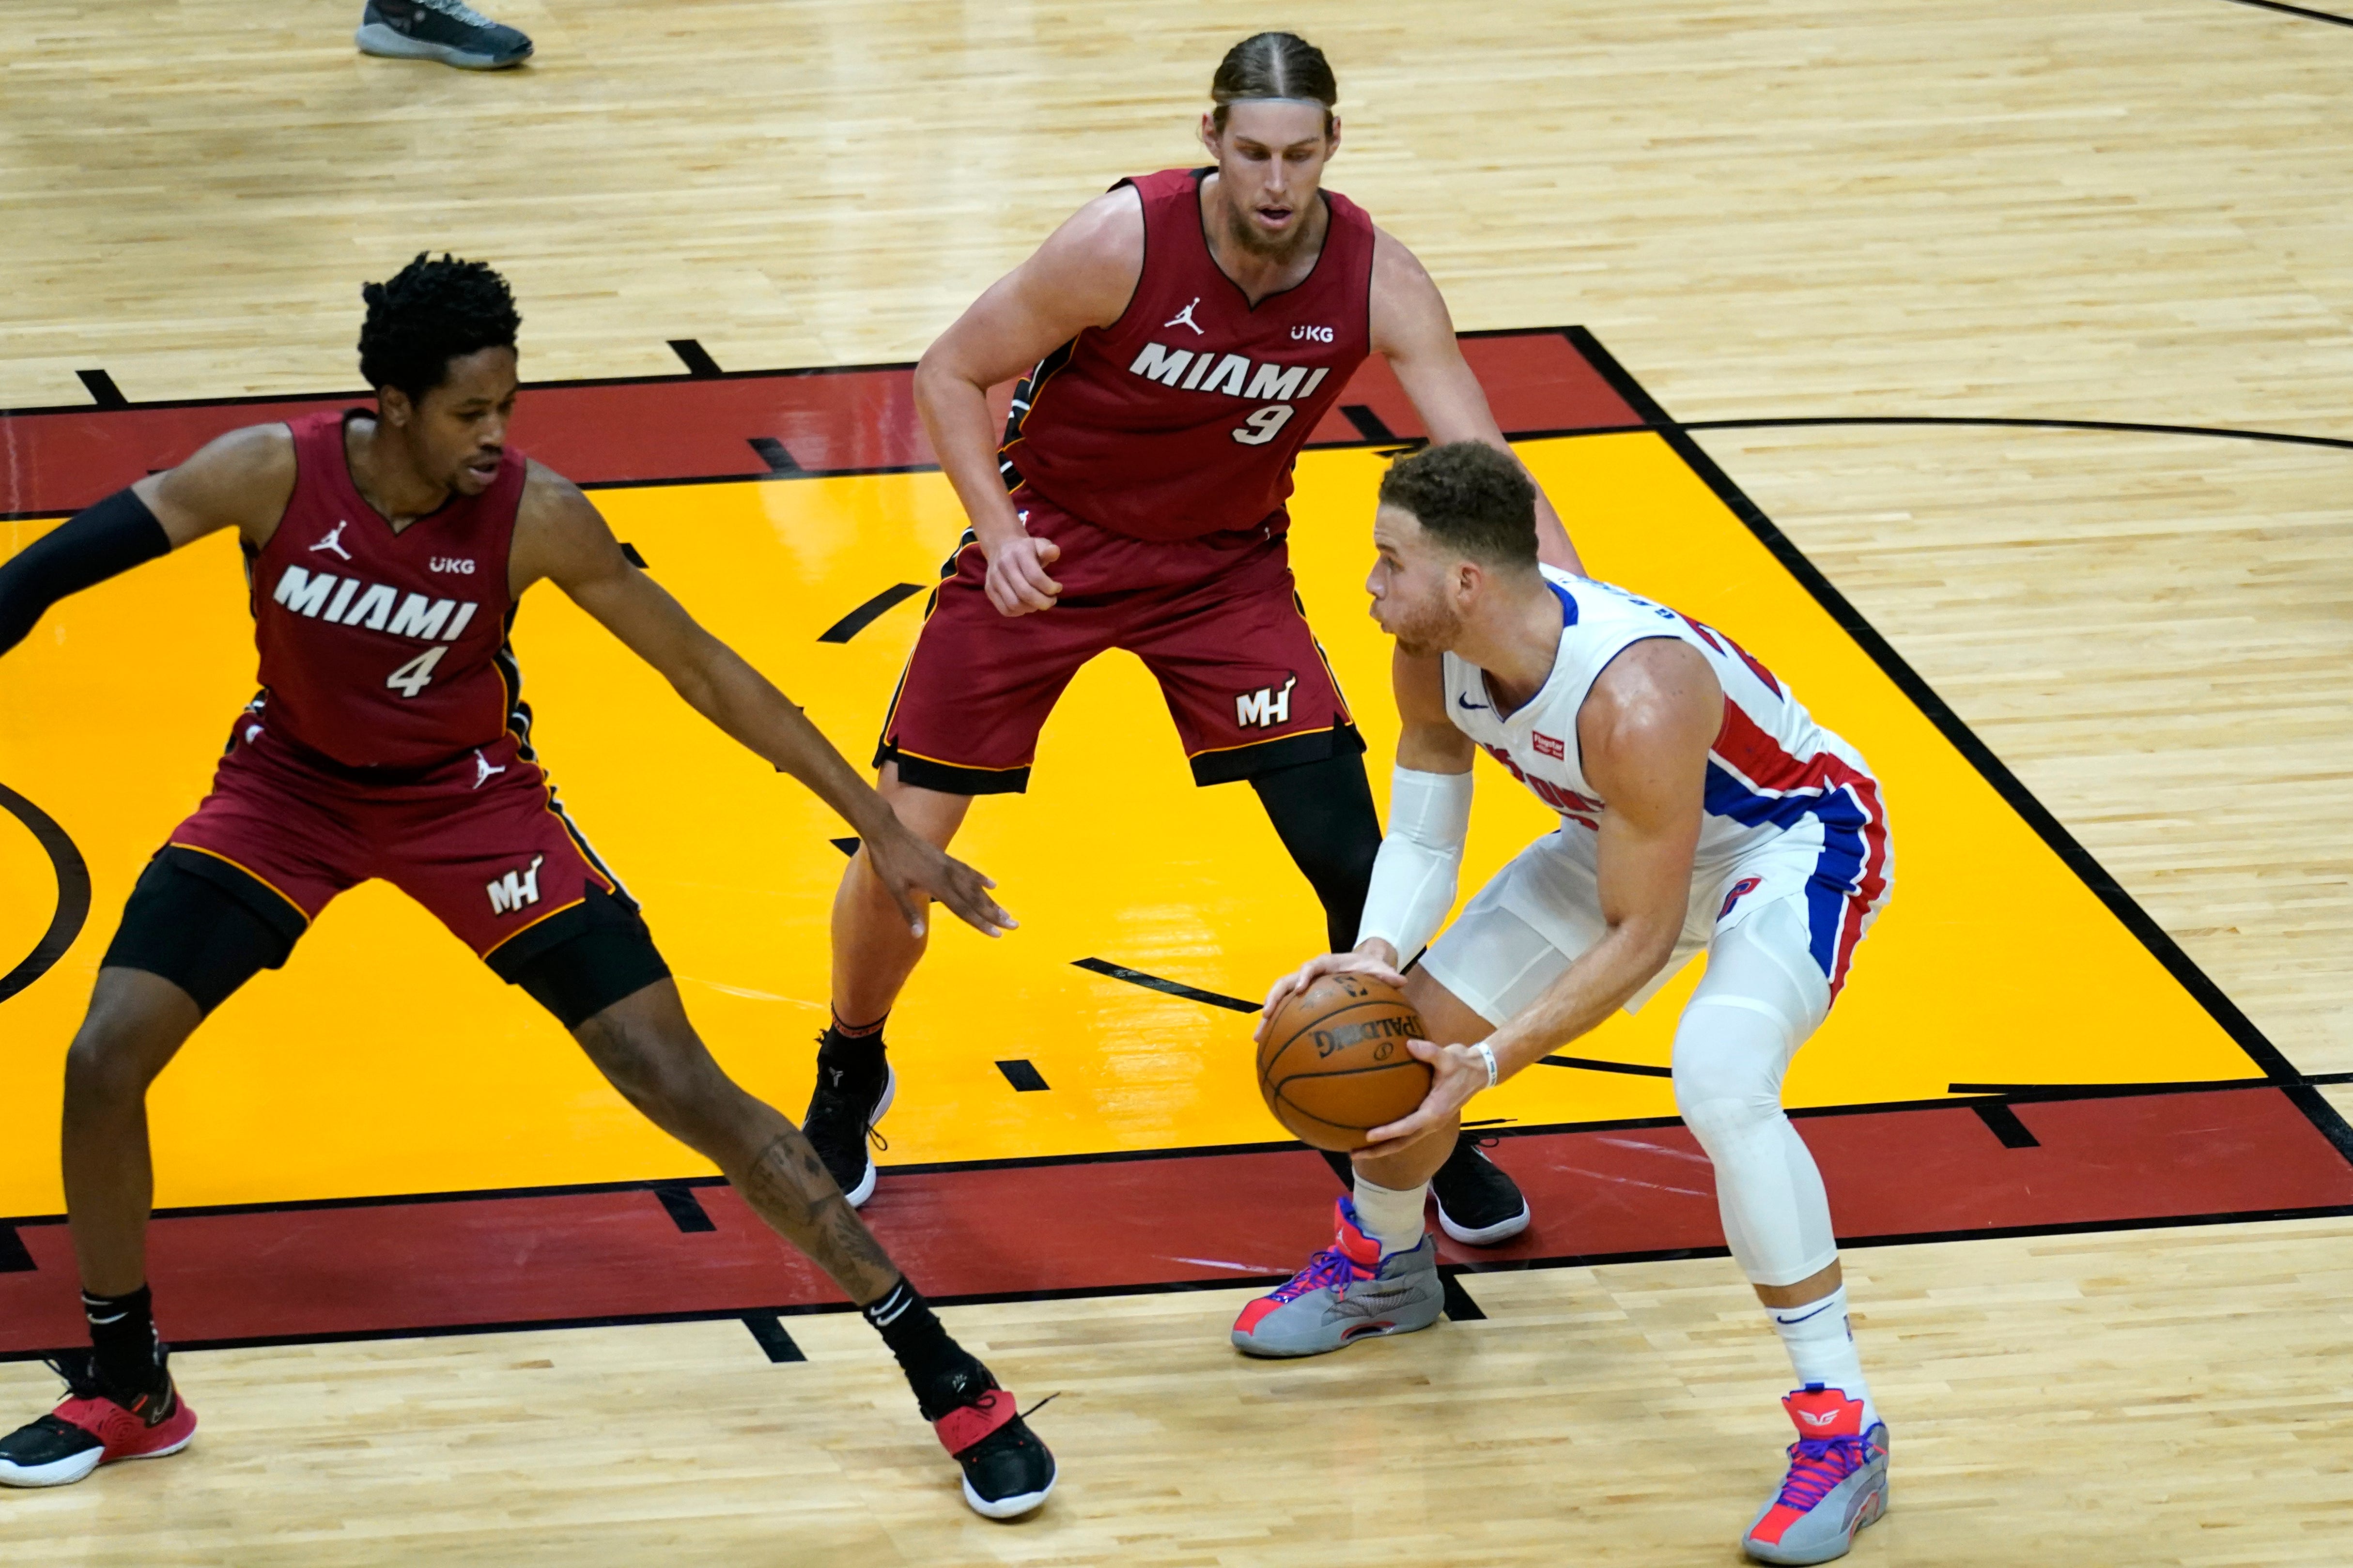 Detroit Pistons forward Blake Griffin, right, drives to the basket as Miami Heat forward KZ Okpala (4) and forward Kelly Olynyk (9) defend during the first half.